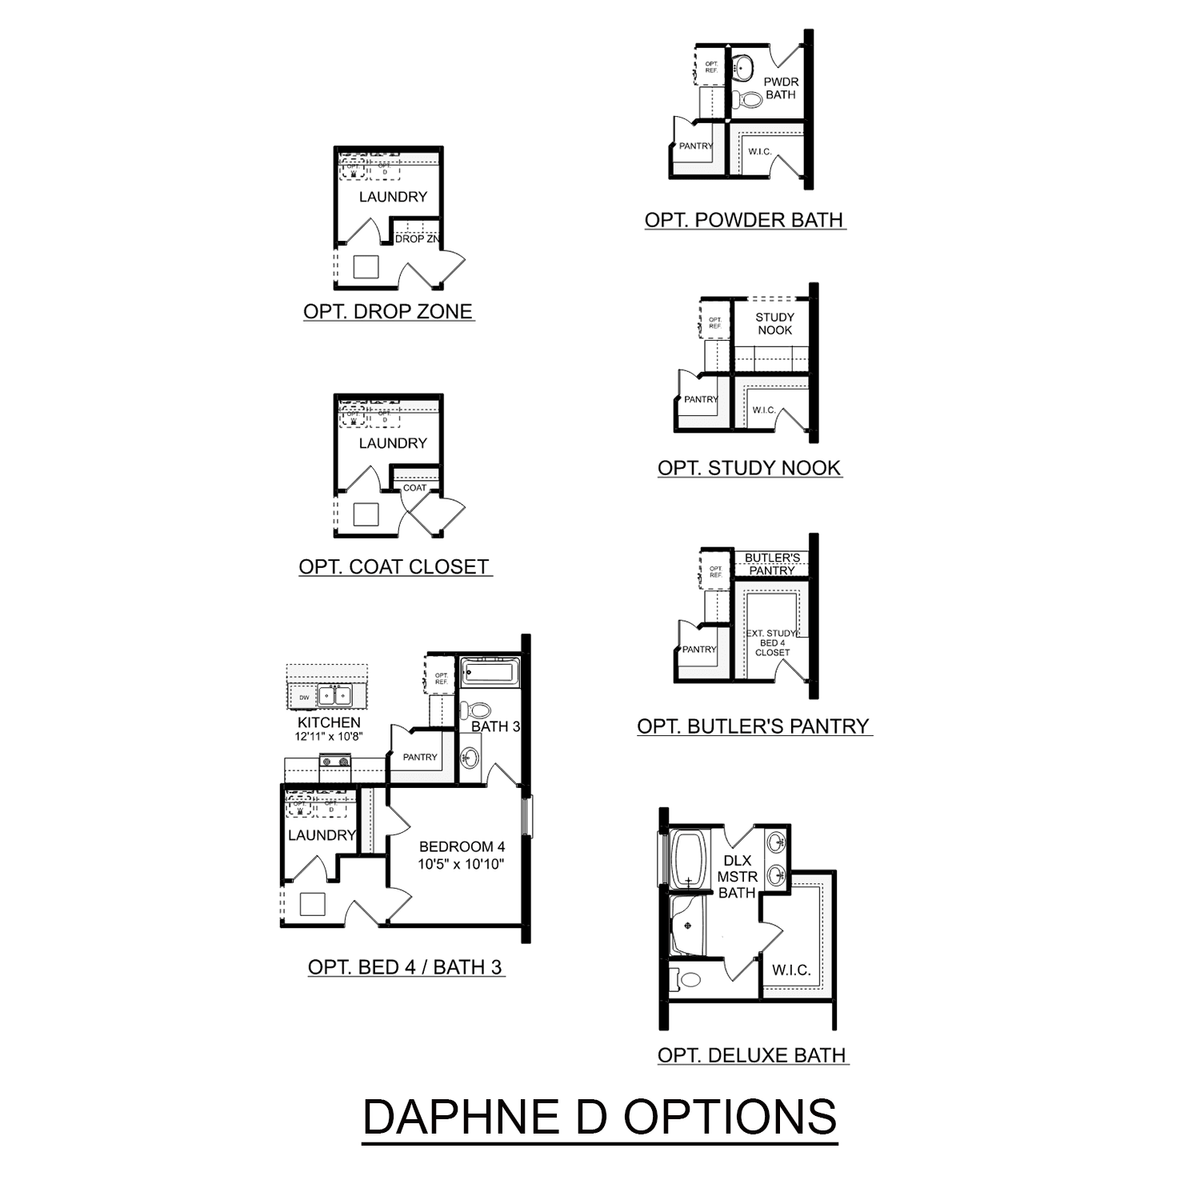 2 - The Daphne D floor plan layout for 183 Fall Meadow Drive in Davidson Homes' Durham Farms community.